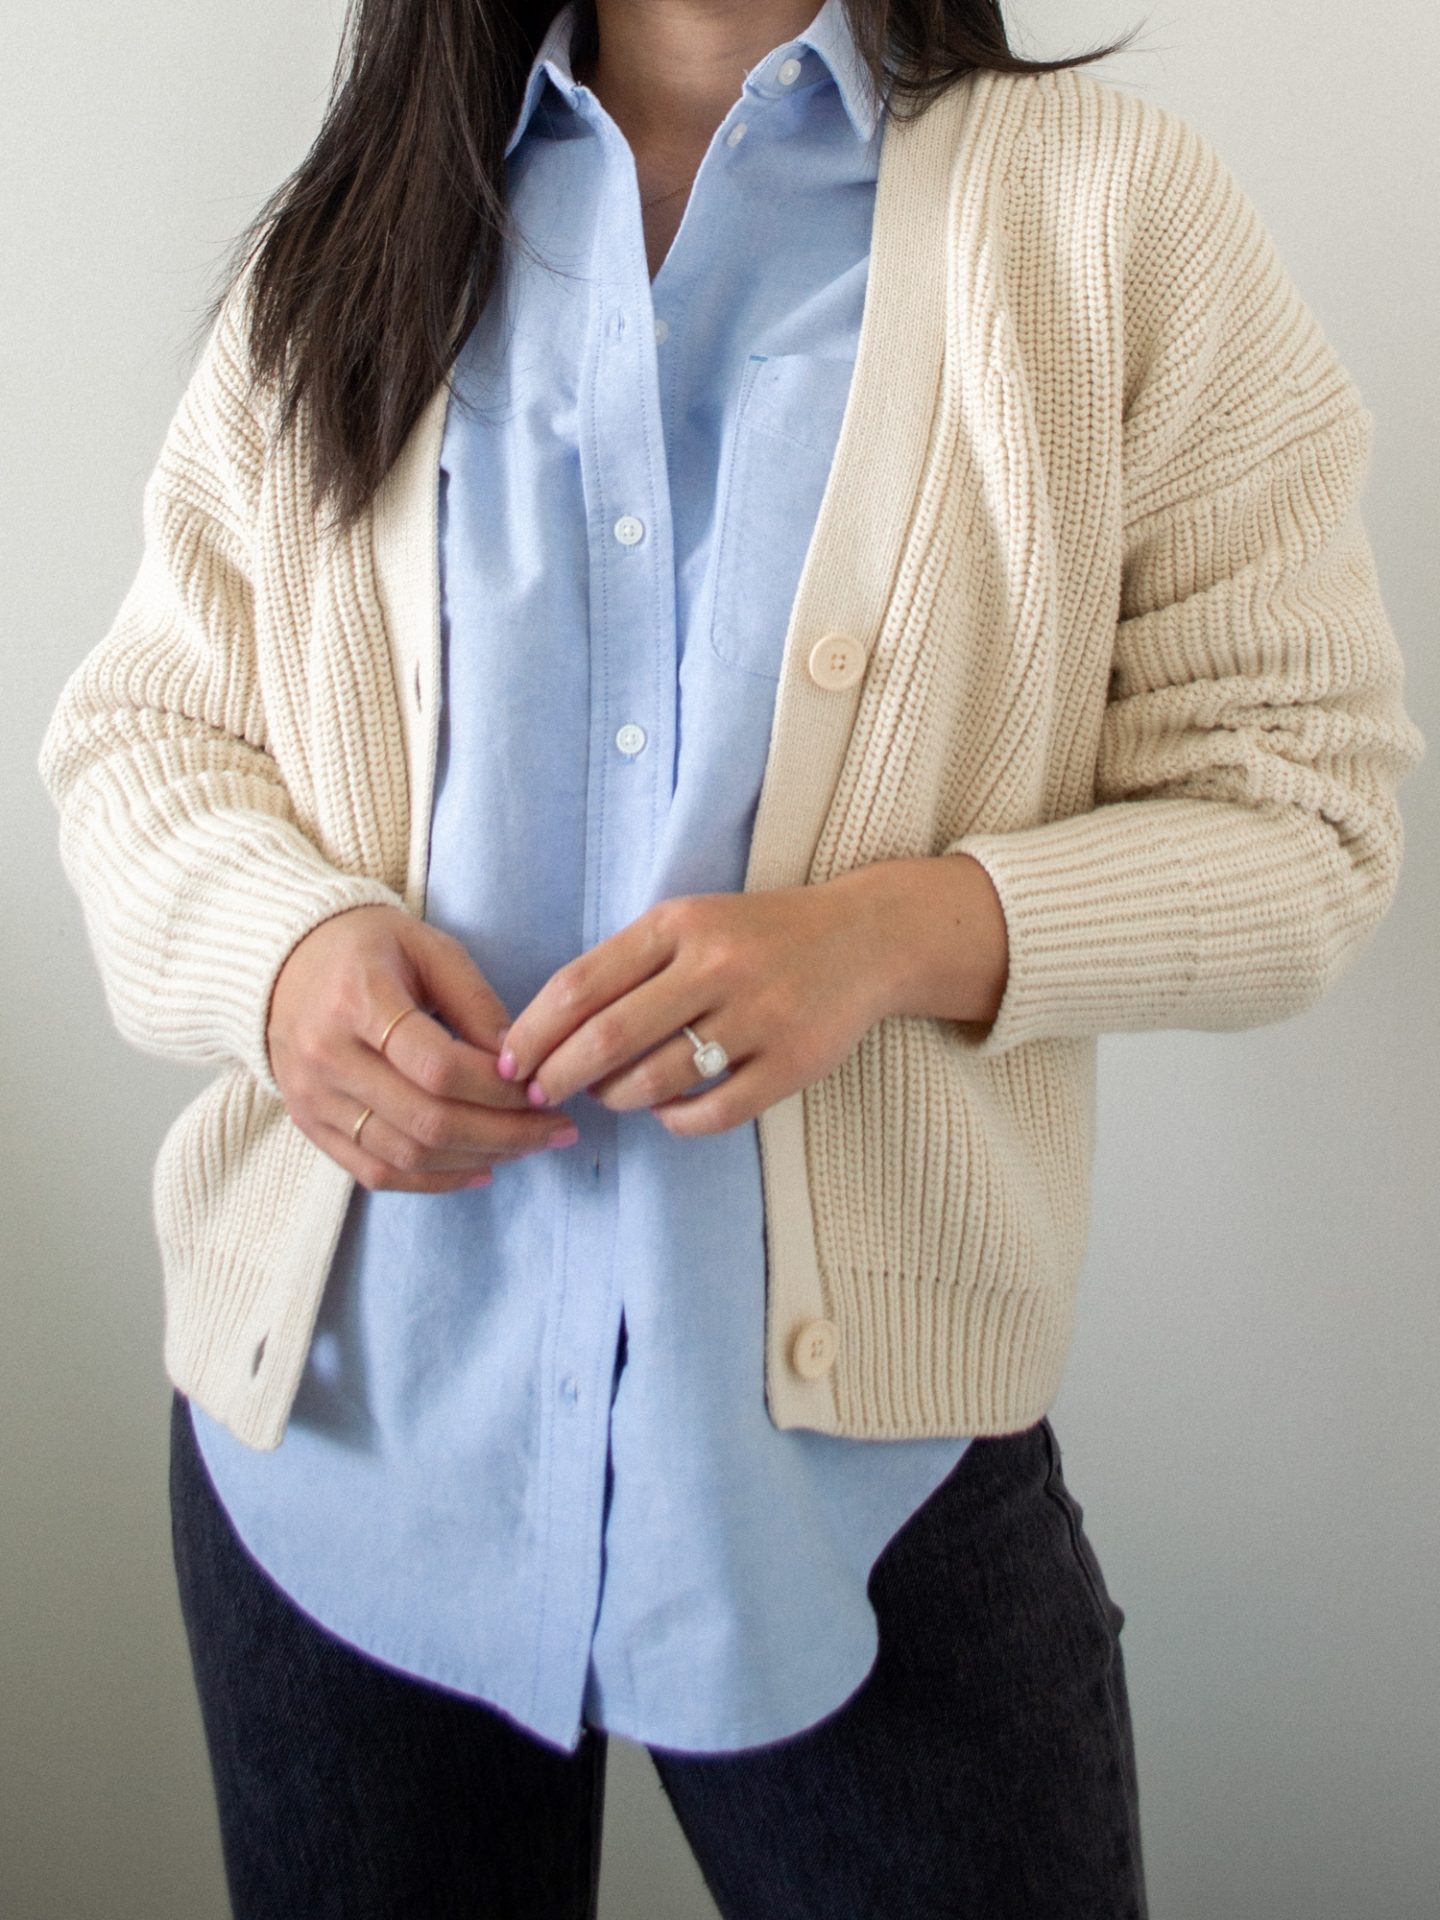 Tradlands Shelter Cardigan Review - The Perfect Sustainable ...